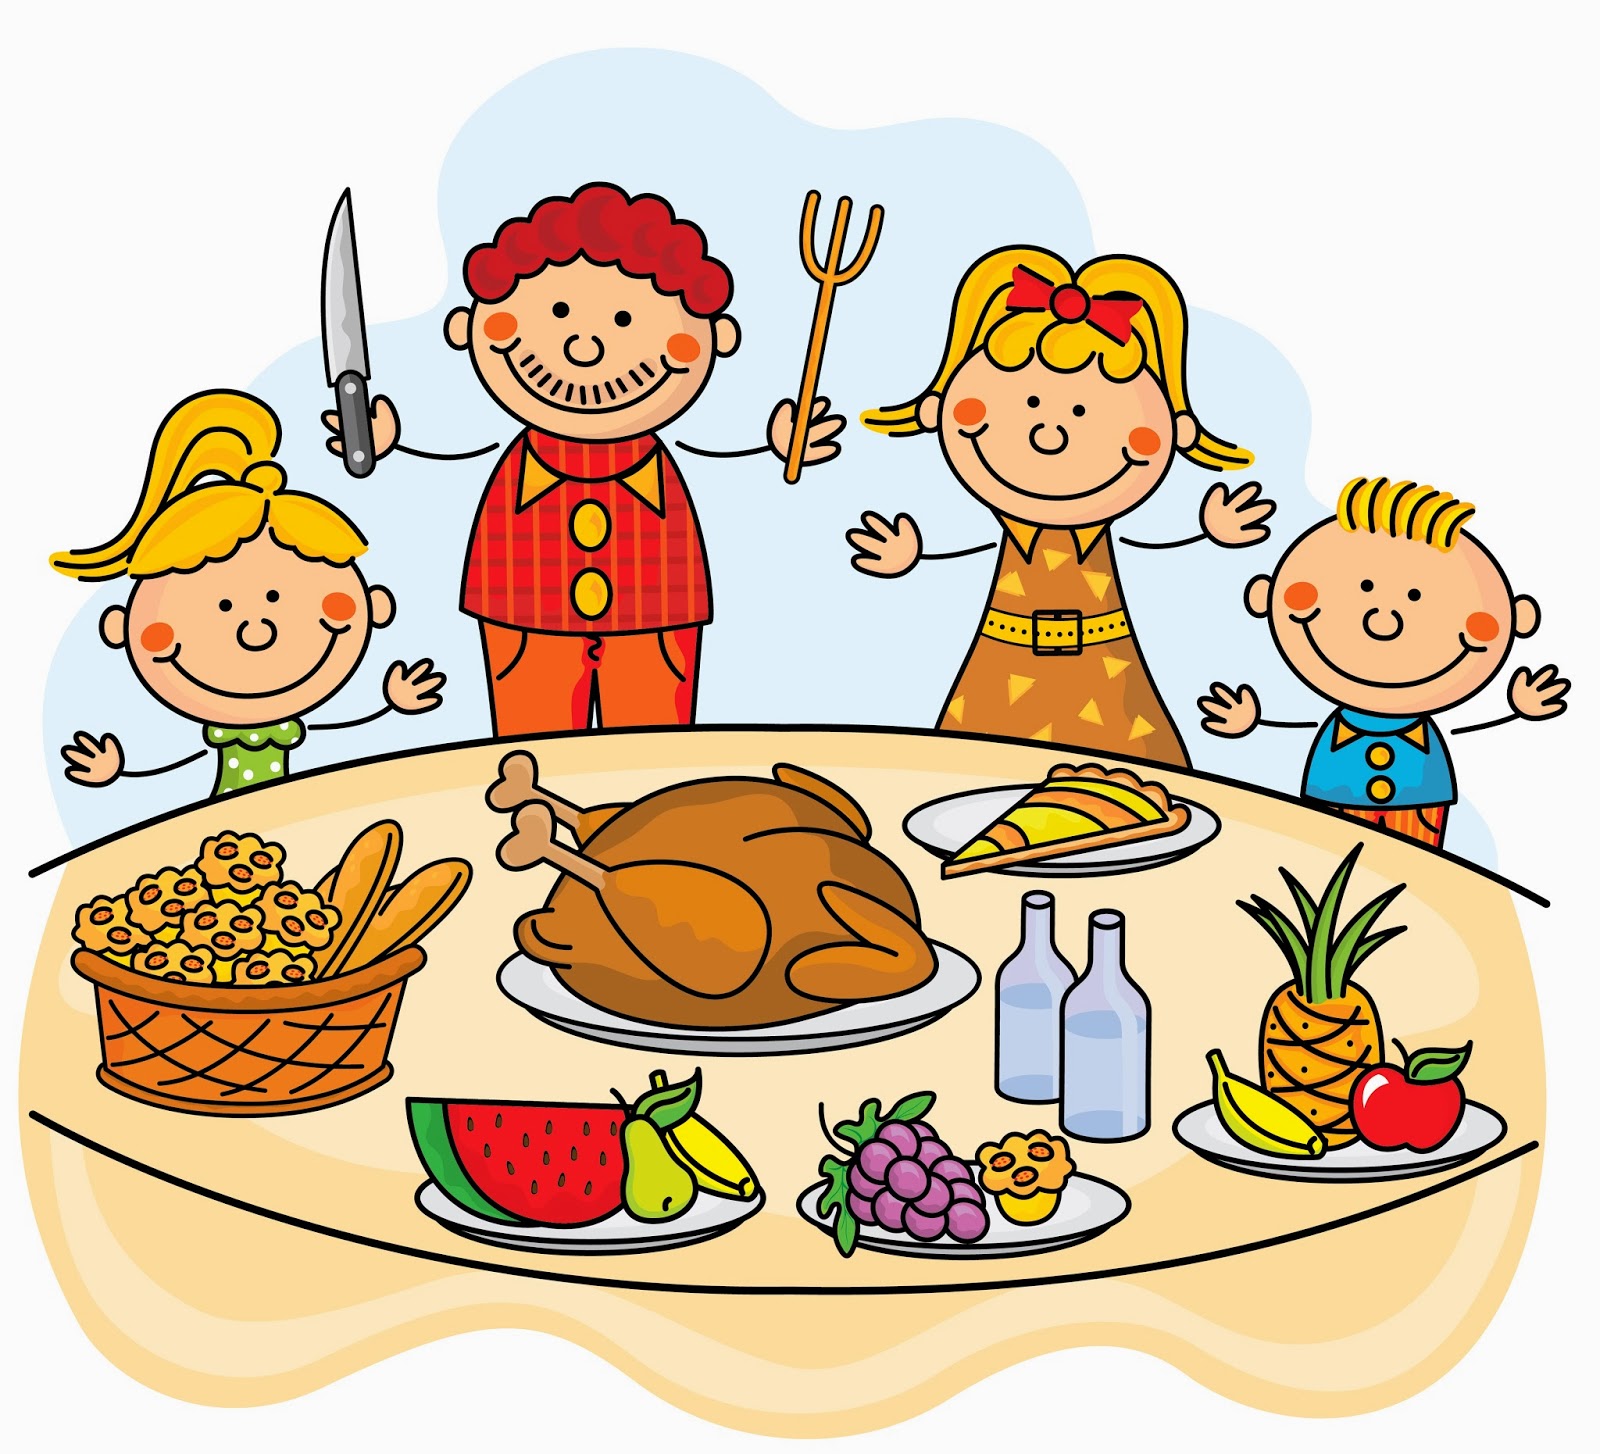 Family at thanksgiving dinner clipart clipartxtras